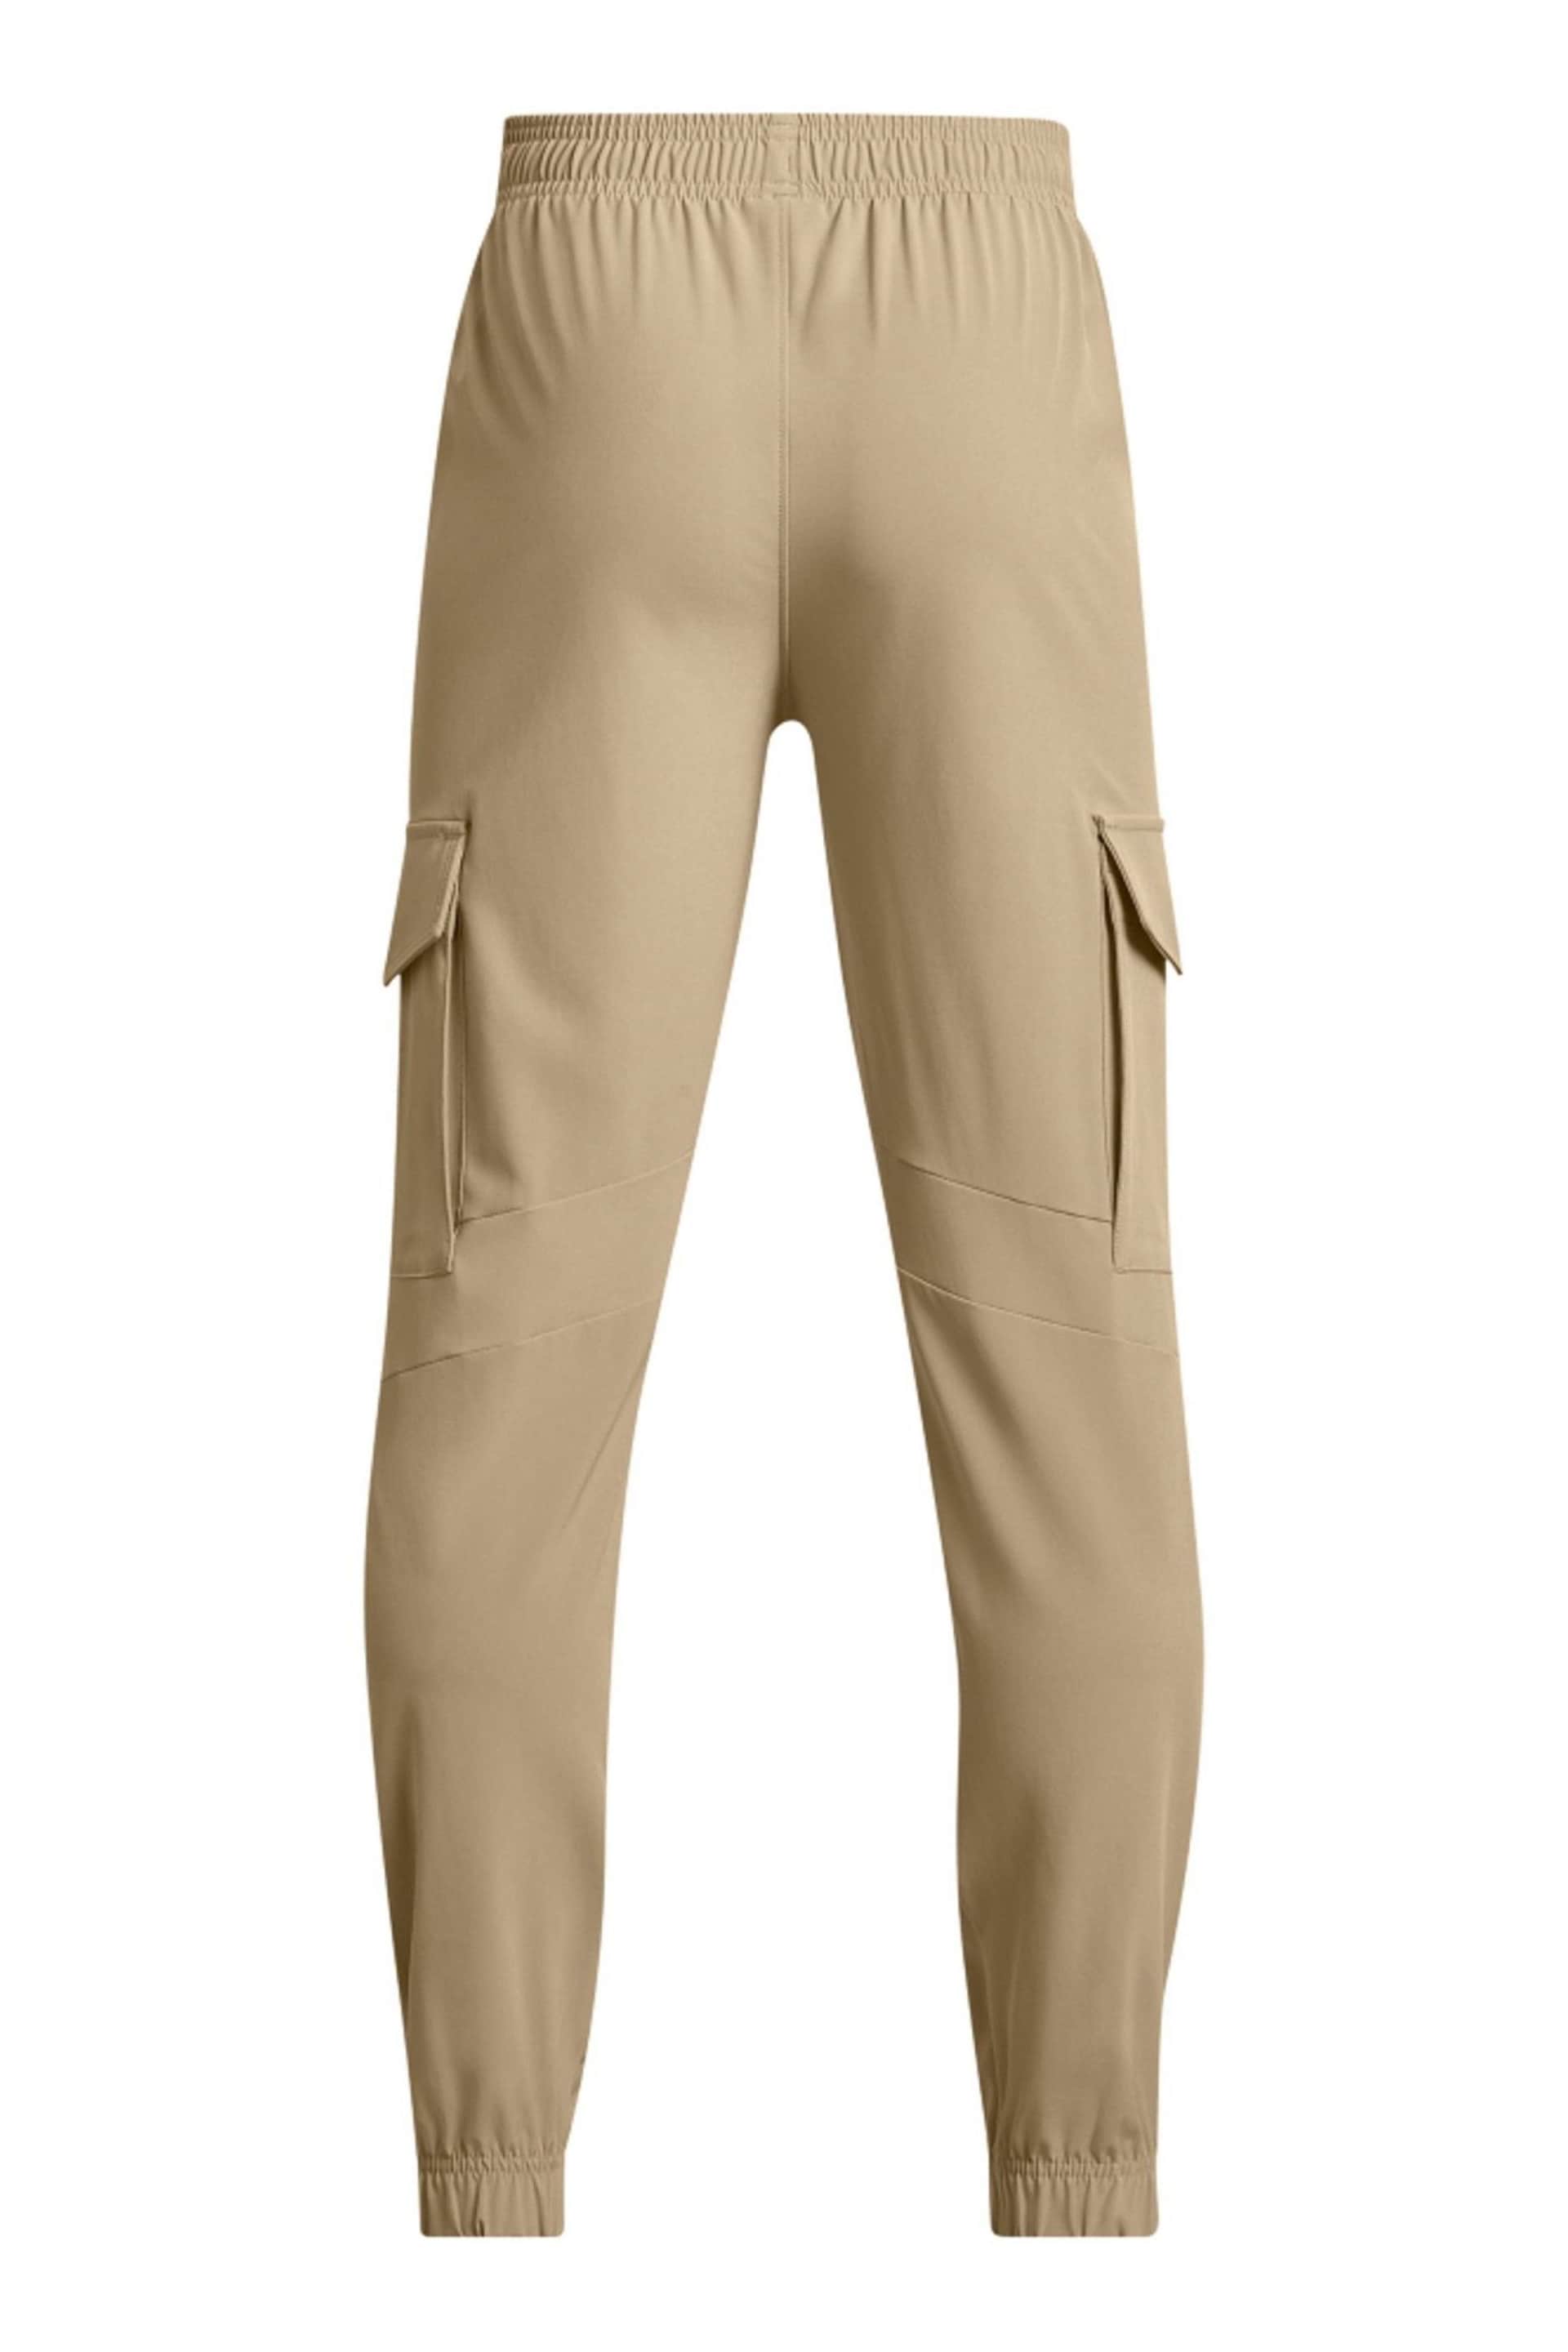 Under Armour Cream Pennant Woven Cargo Joggers - Image 2 of 2